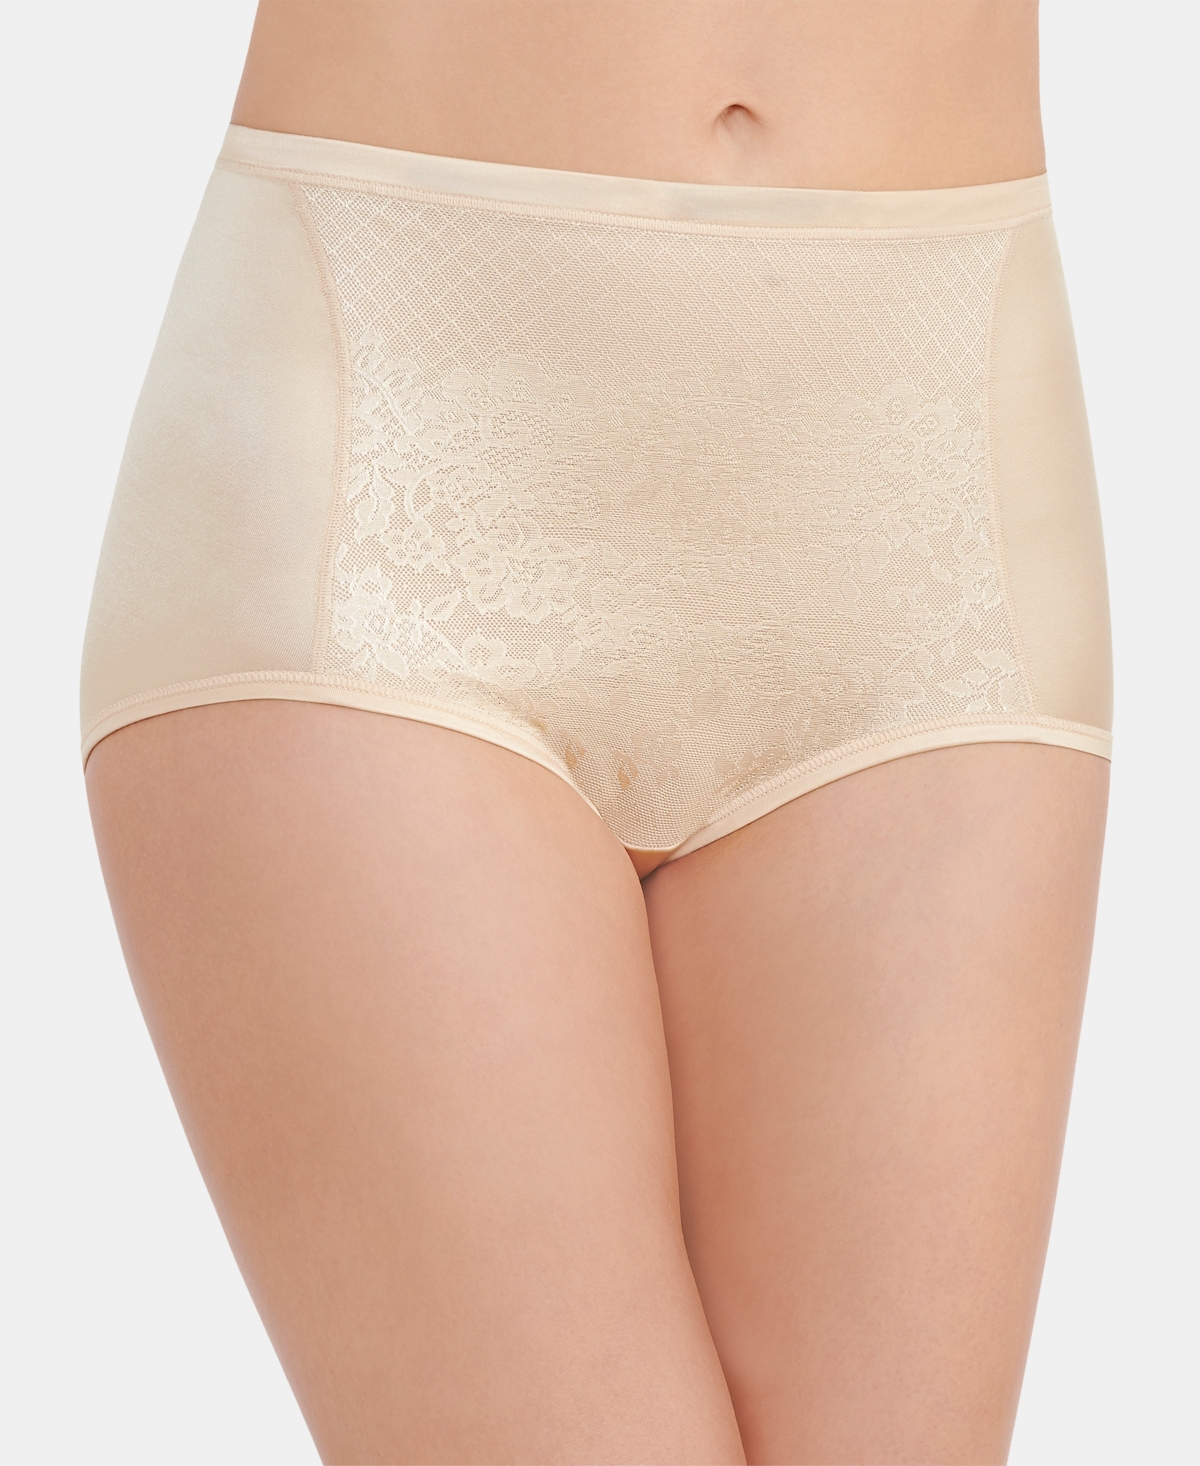 Women's Smoothing Comfort with Lace Brief Underwear - Champagne (Nude )